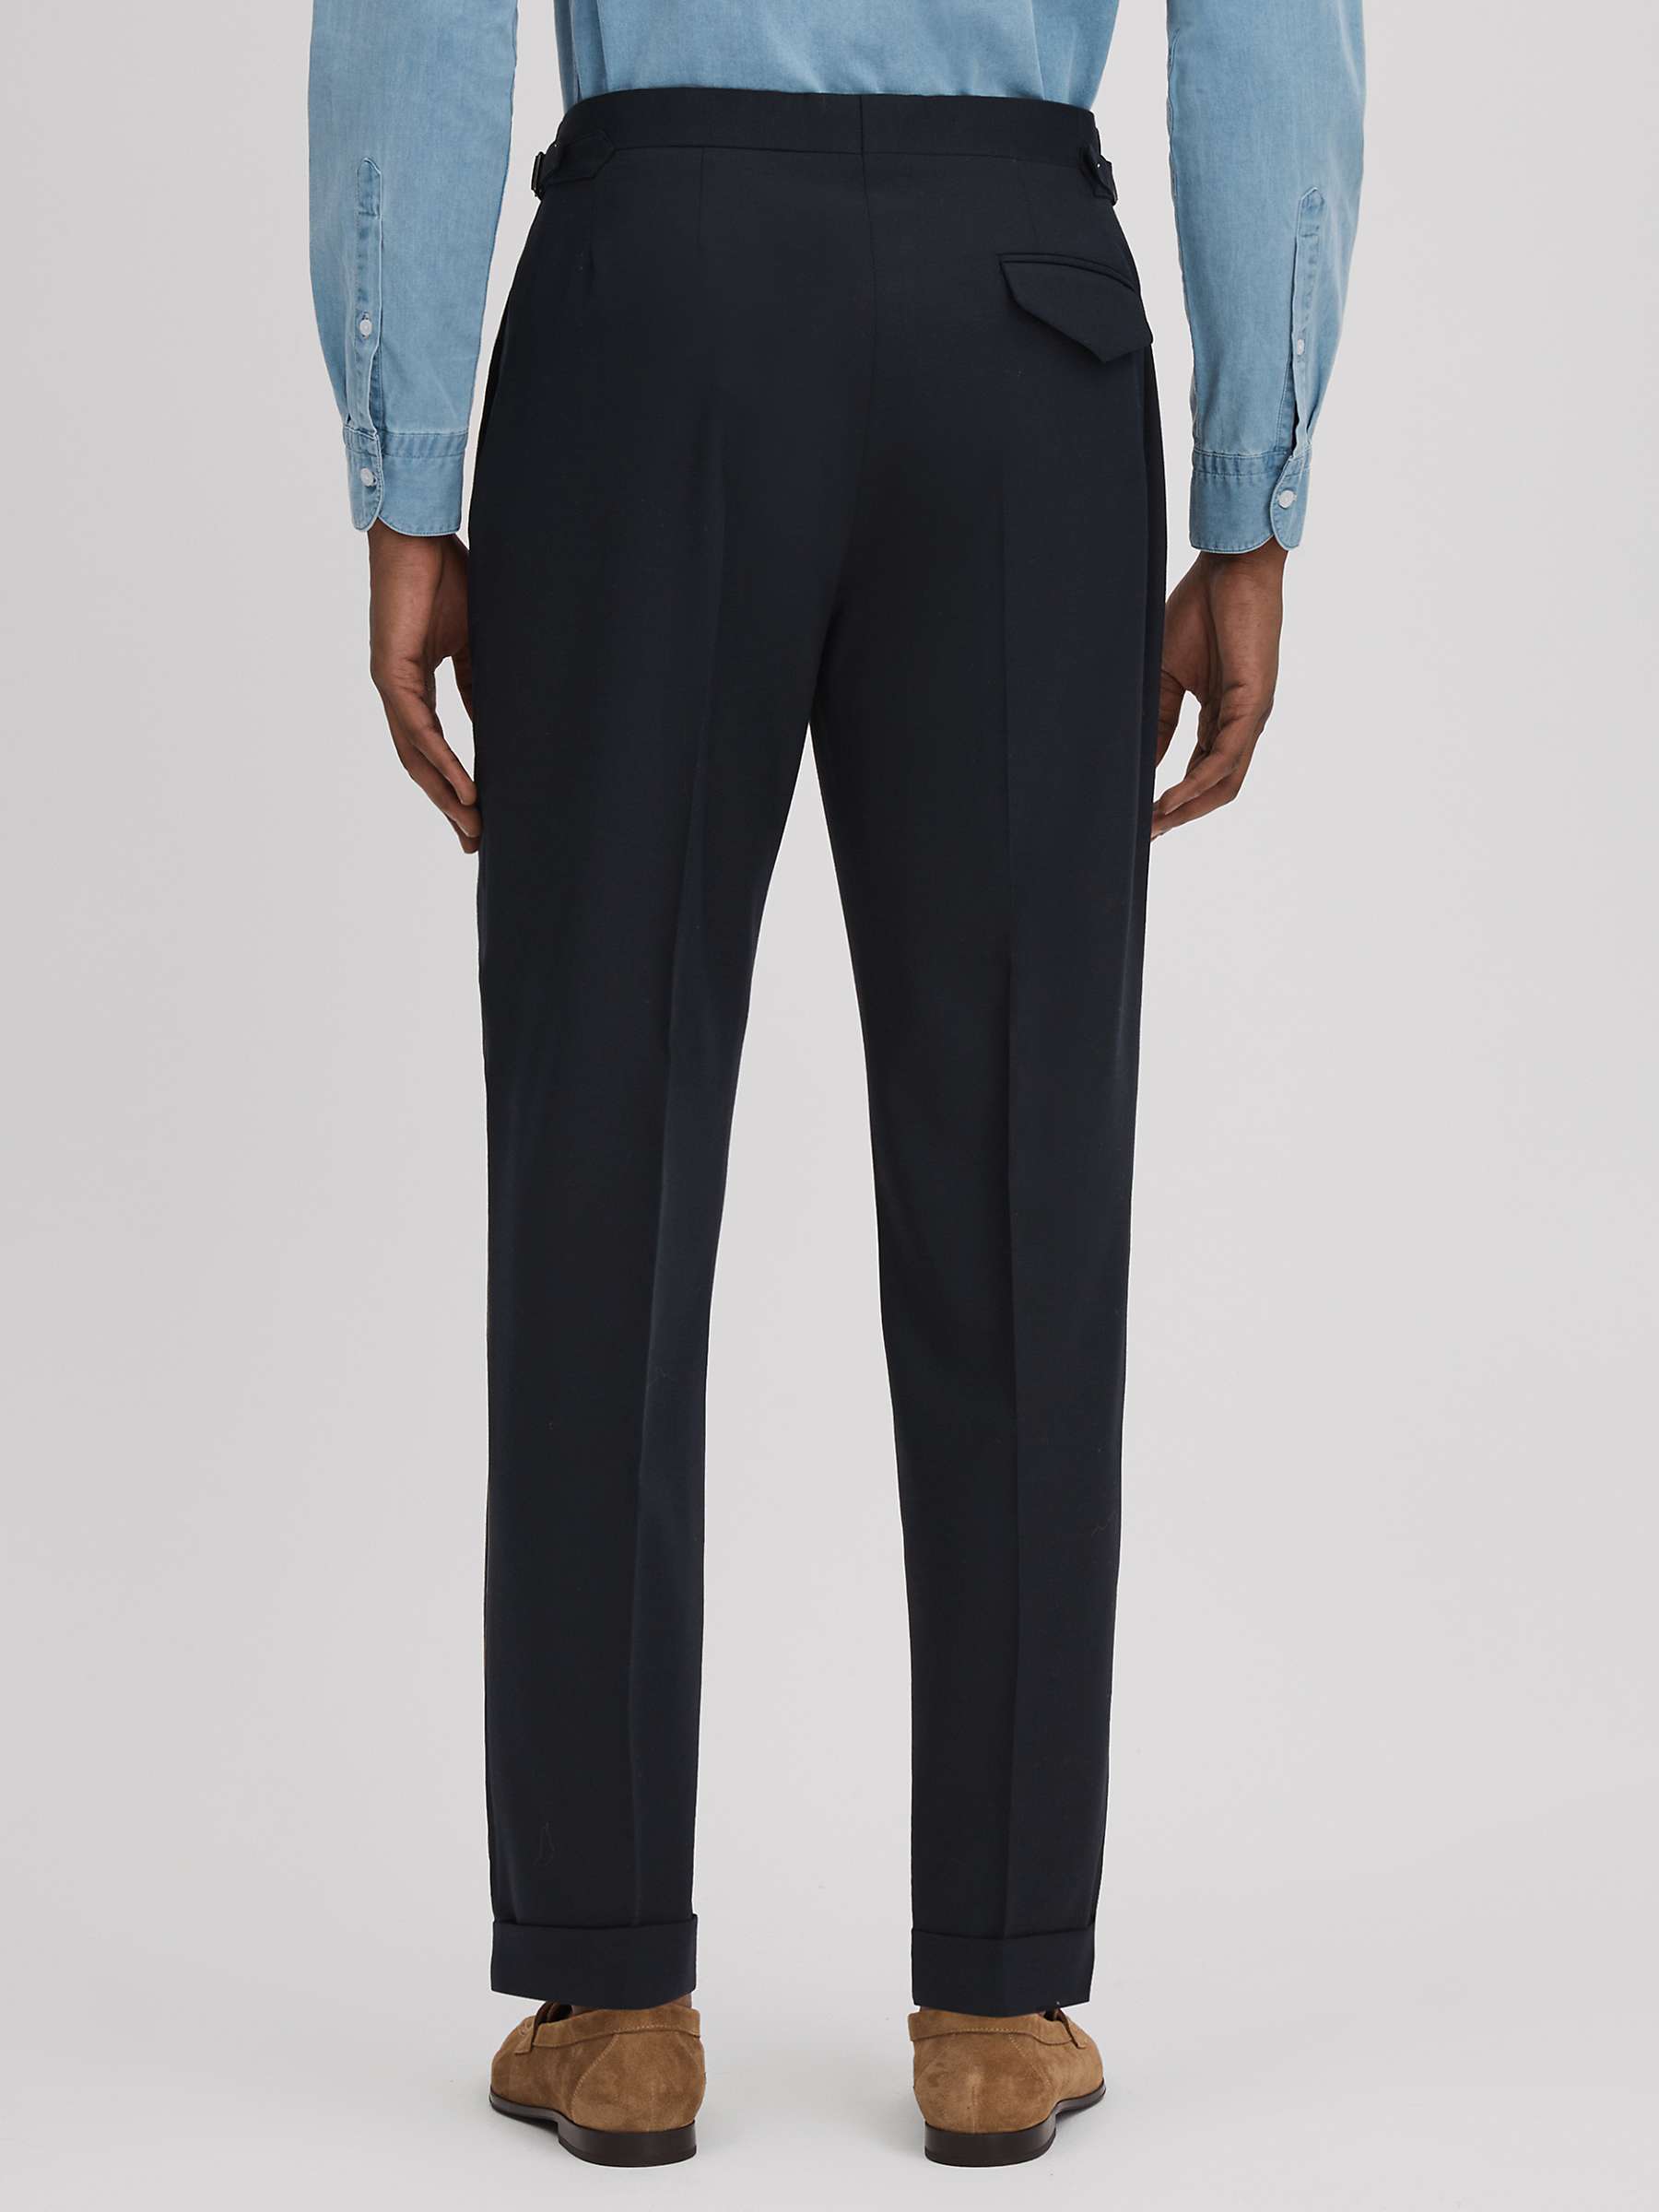 Buy Reiss Valentine Hopsack Trousers Online at johnlewis.com